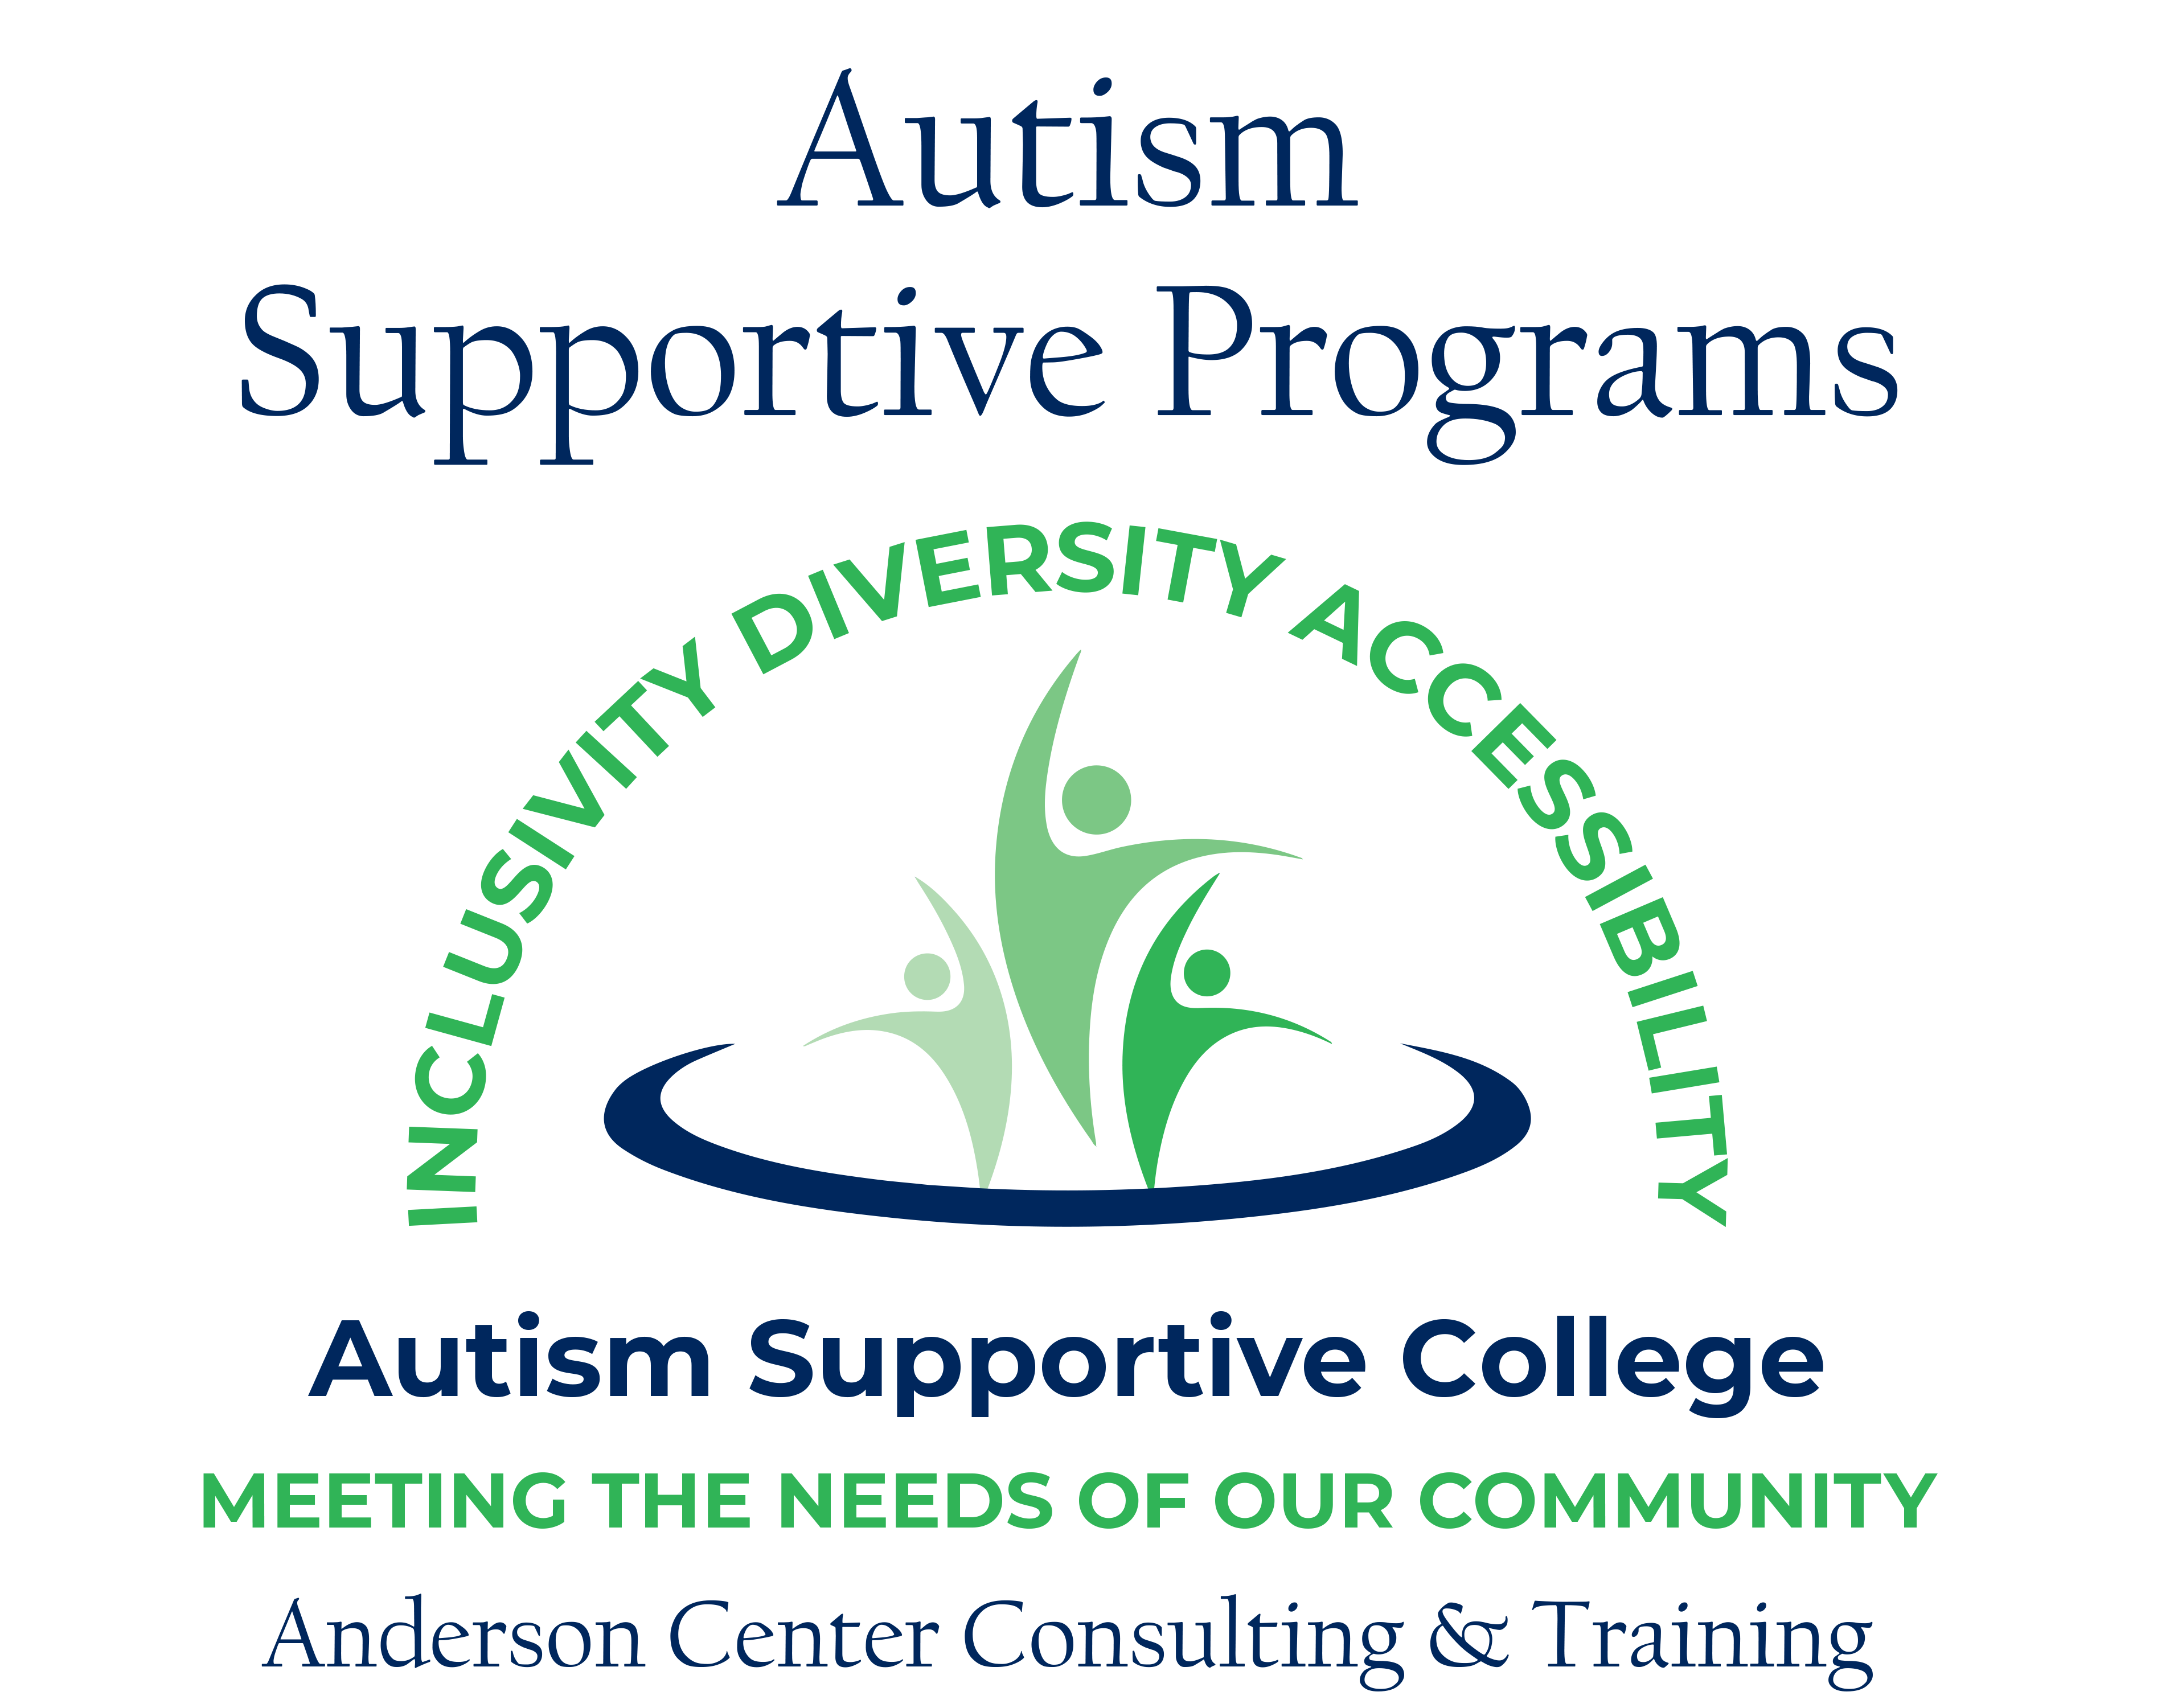 Autism Supportive Programs - Anderson Center for Autism